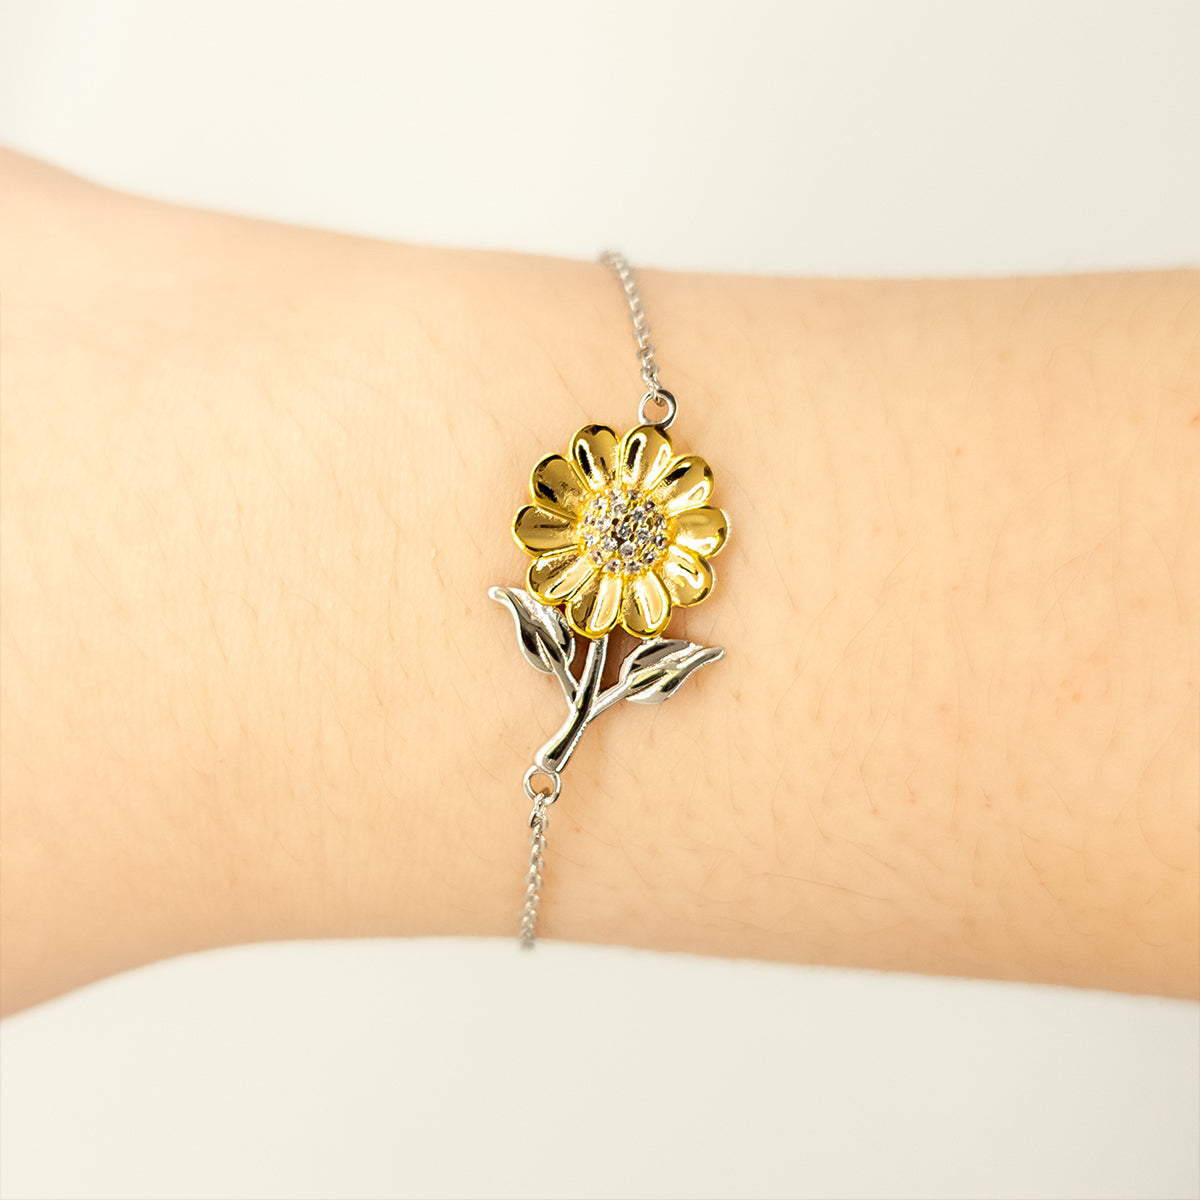 Engraved Sunflower Bracelet for Mum In Law - You will always have a special place in my heart - Perfect Christmas Gift for Mother-in-Law to show love, appreciation, and gratitude